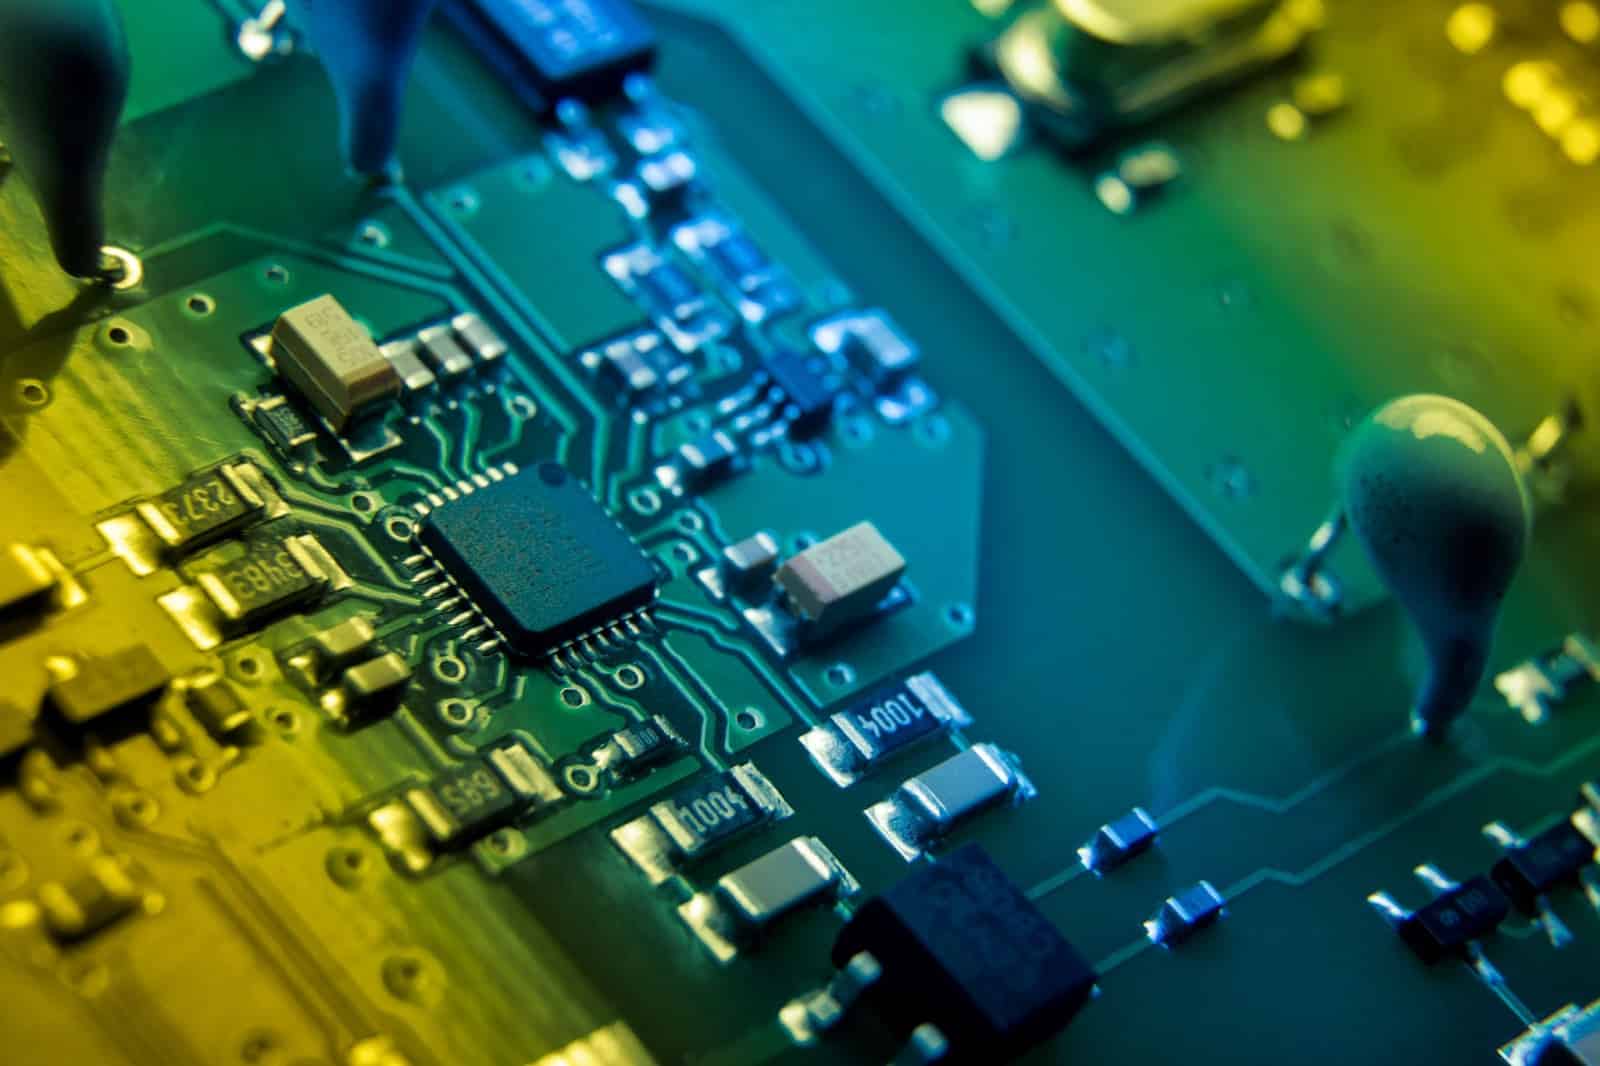 Embedded System Development is bridging hardware and software for efficient, tailored solutions in today's connected world.